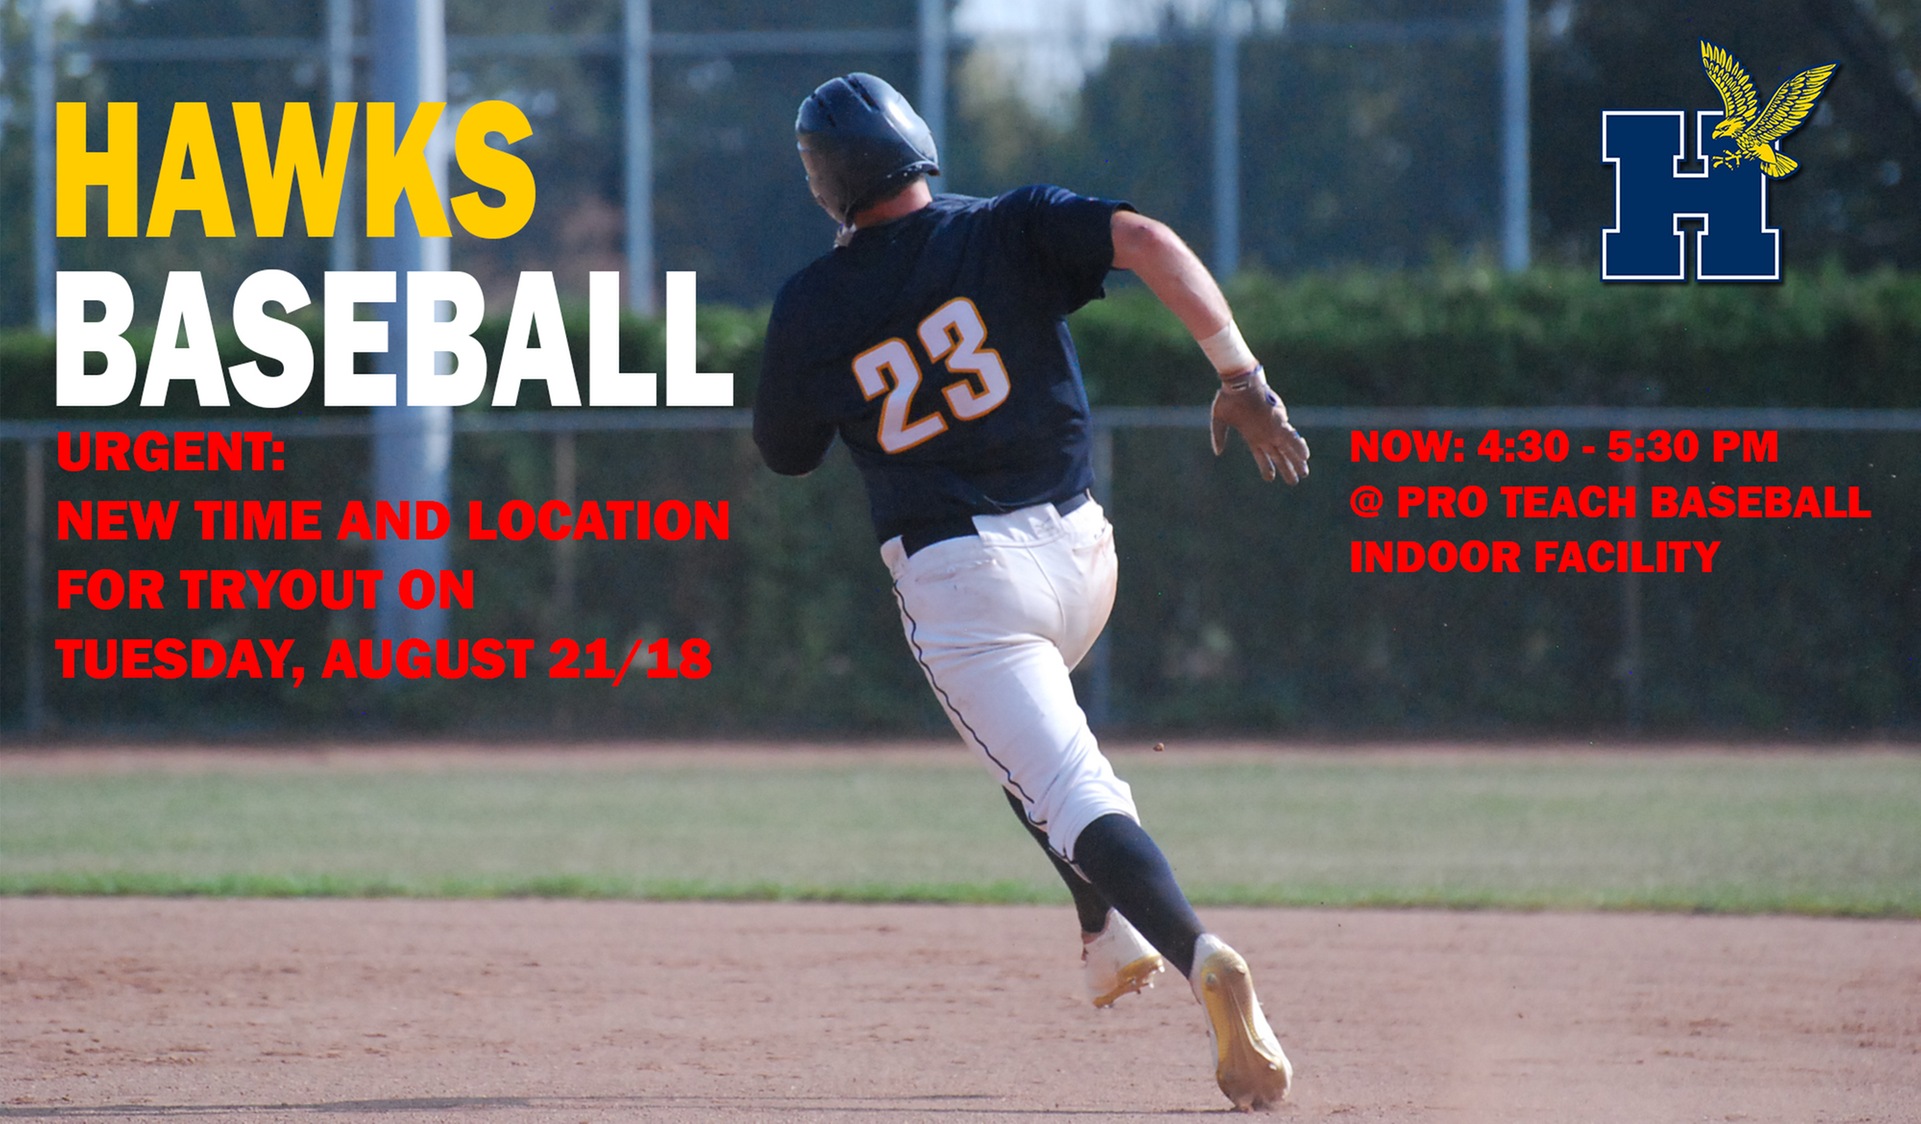 NEW TIME AND LOCATION FOR TUESDAY MEN'S BASEBALL TRYOUT